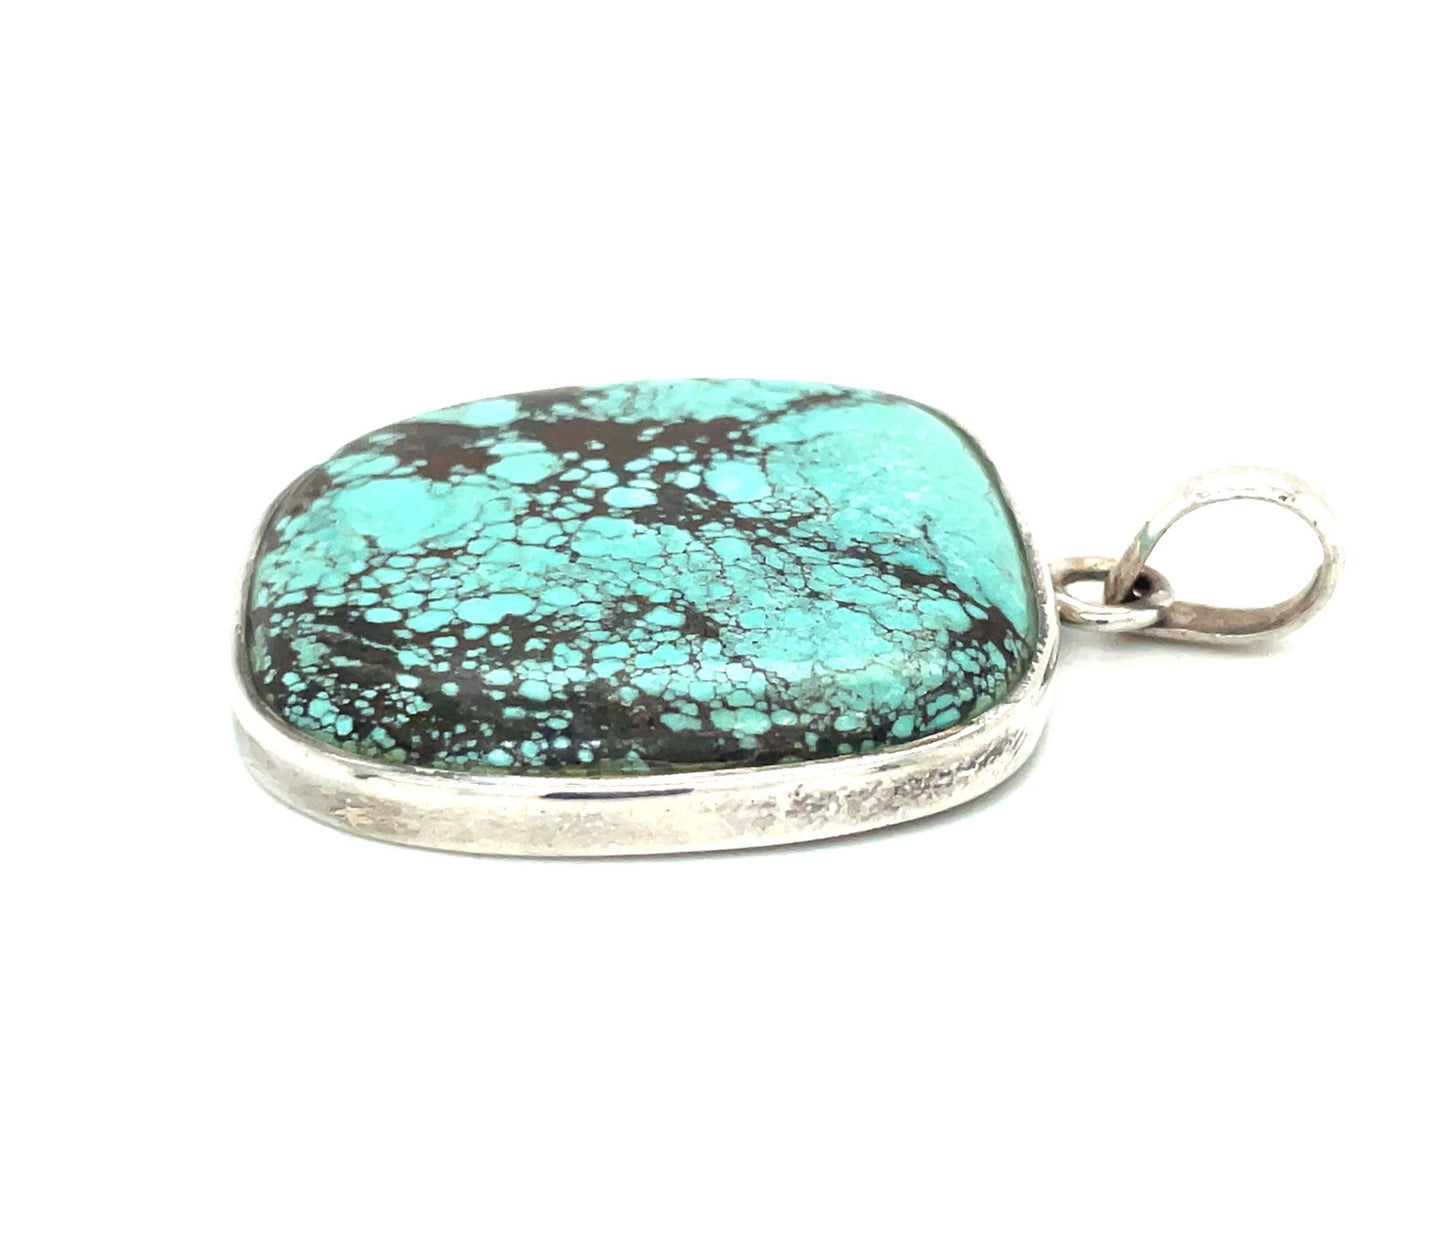 Vintage Turquoise and Sterling Silver Pendant